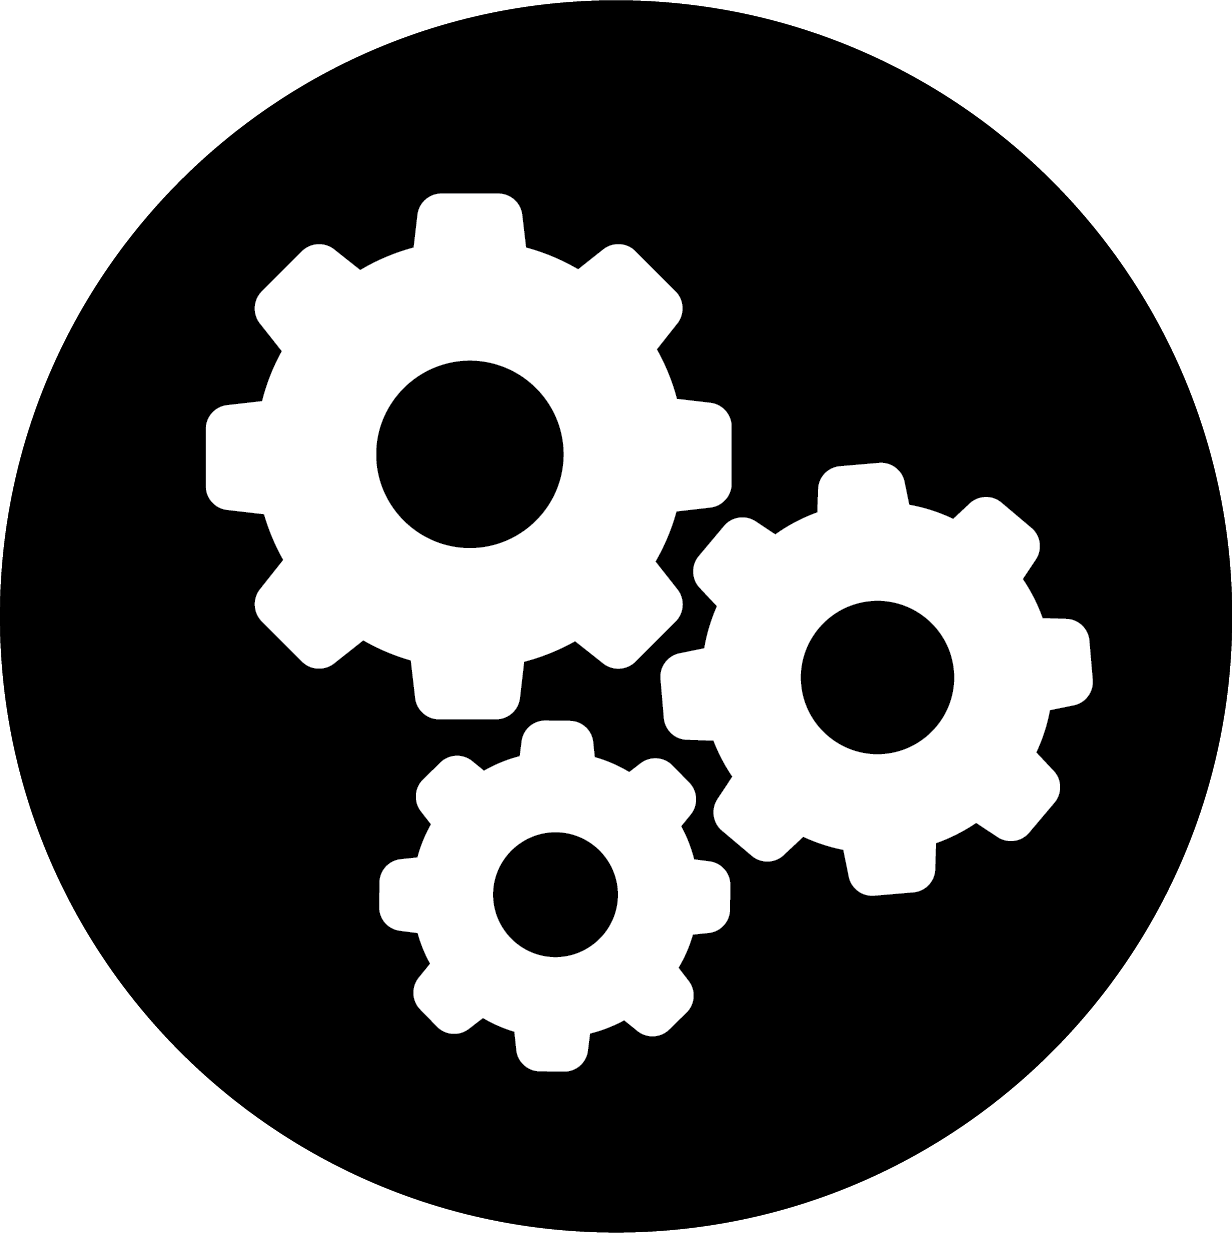 A White Gears On A Black Background